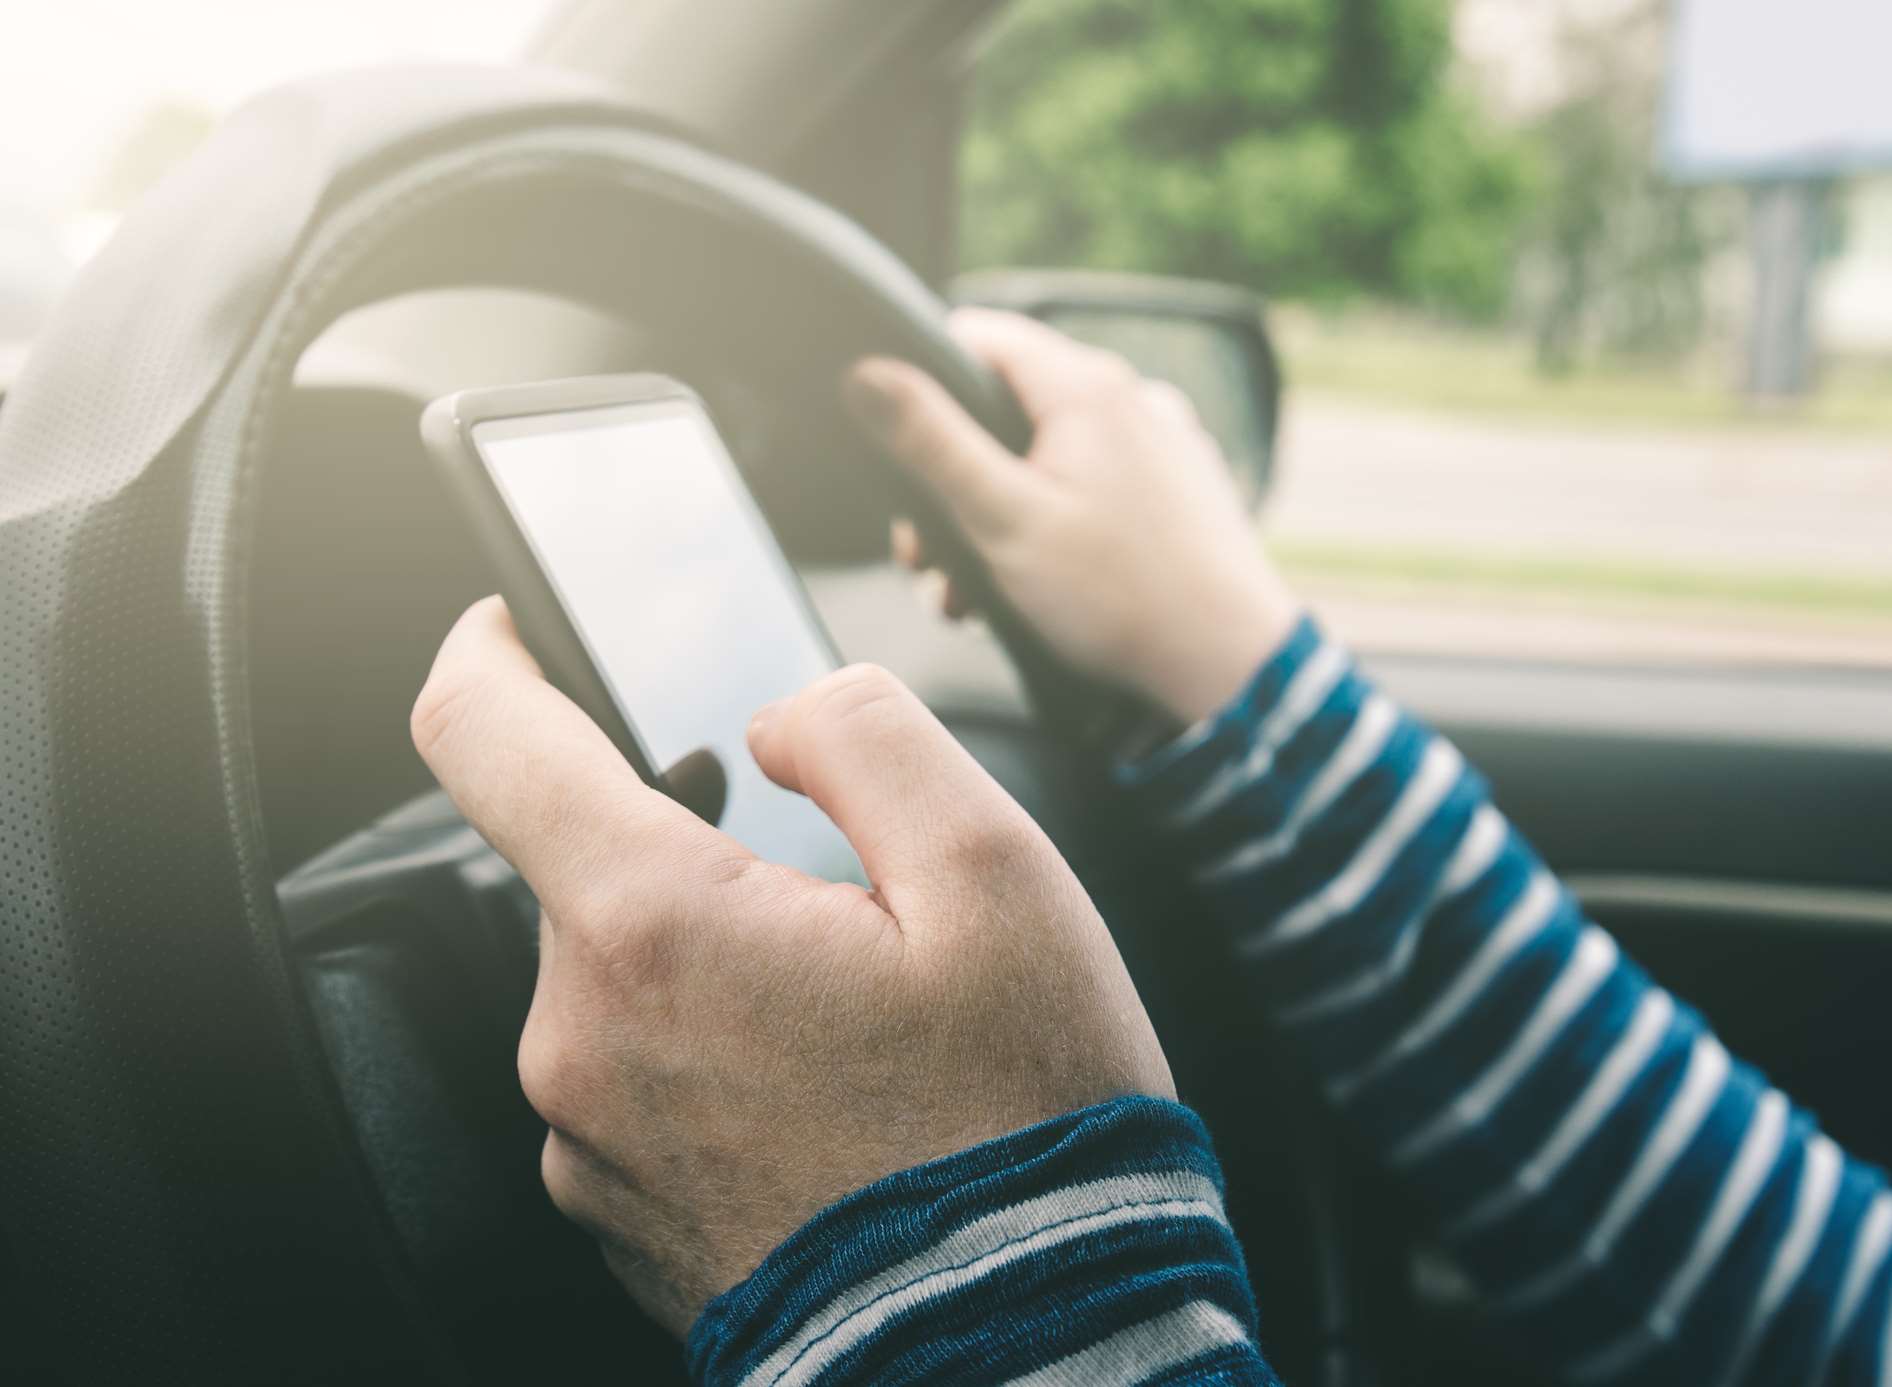 It's a criminal offence to use a mobile phone while driving